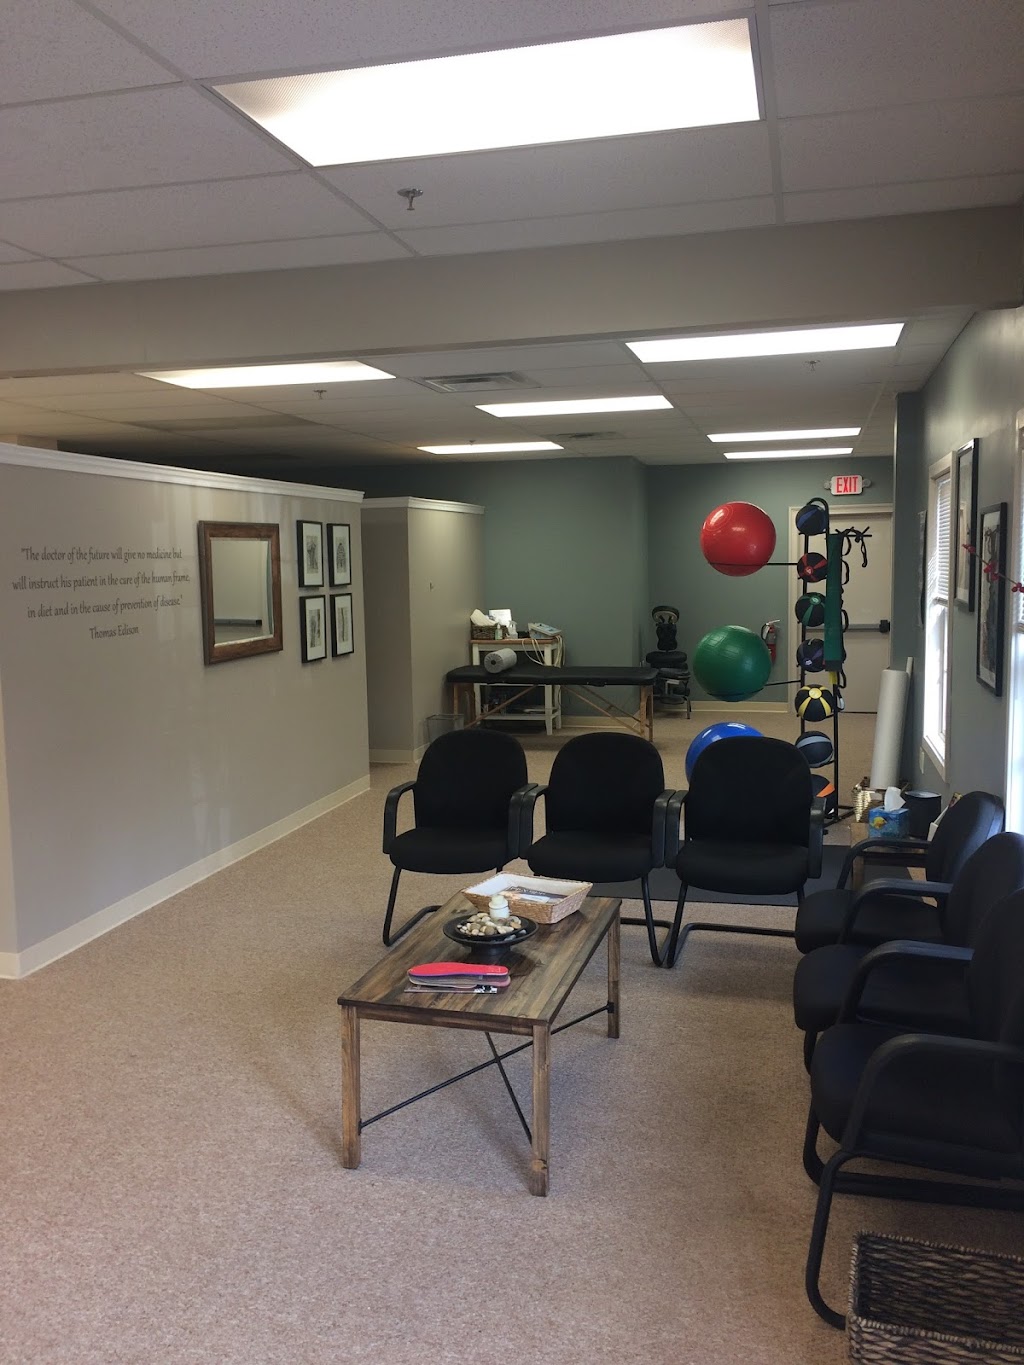 Fitzgerald Family Chiropractic | 1456 Ferry Rd #305a, Doylestown, PA 18901 | Phone: (215) 340-9100